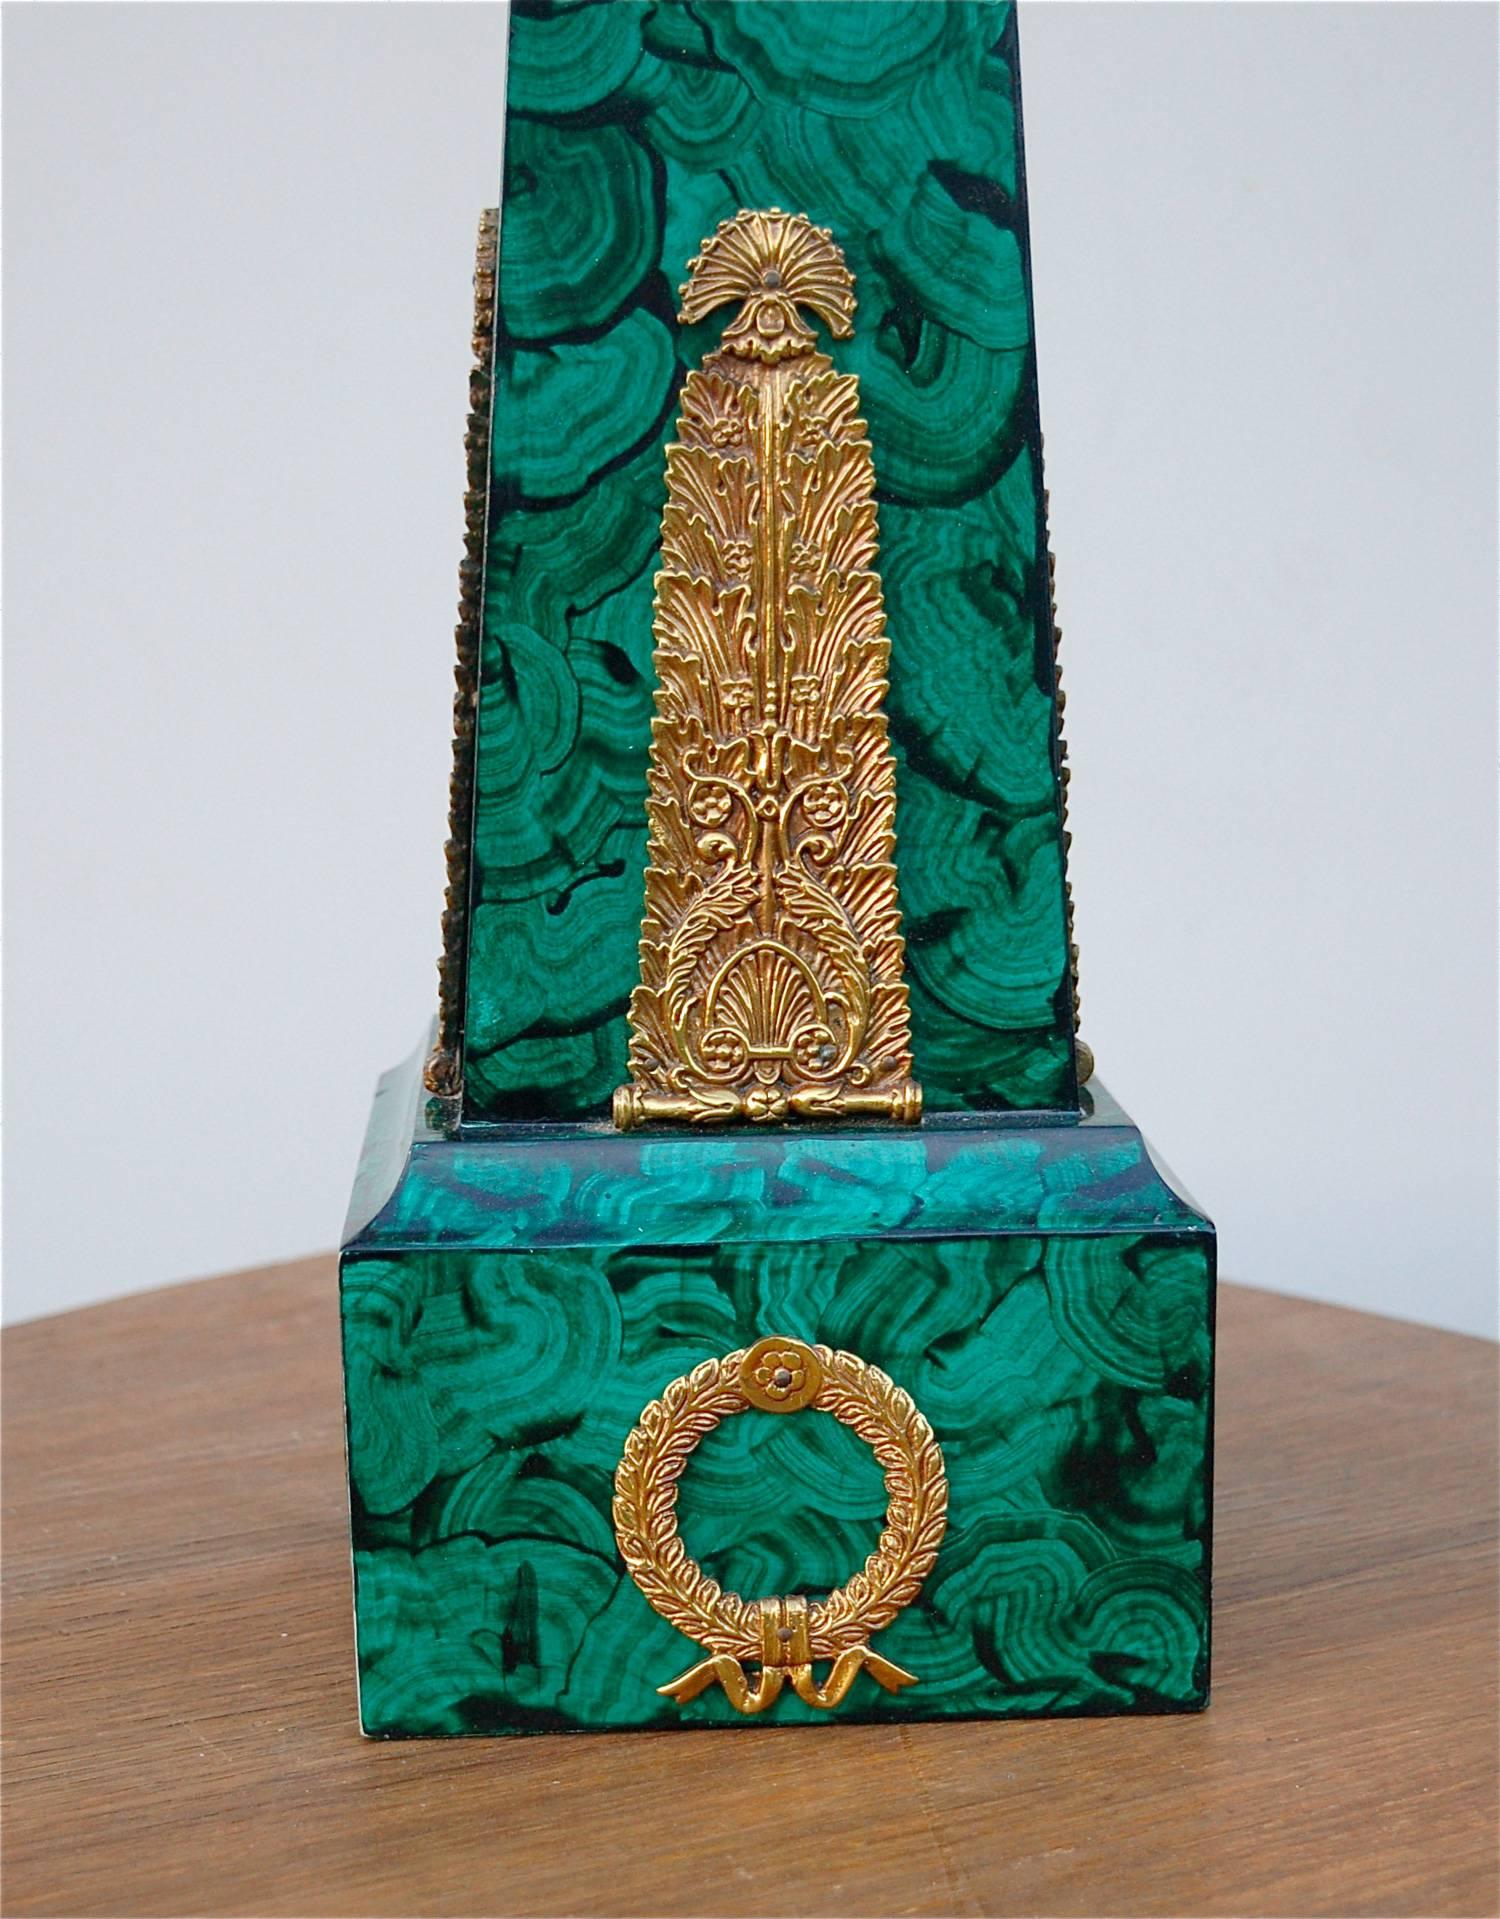 Hand-Painted Obelisk Candleholder with Brass and Faux Malachite Finish